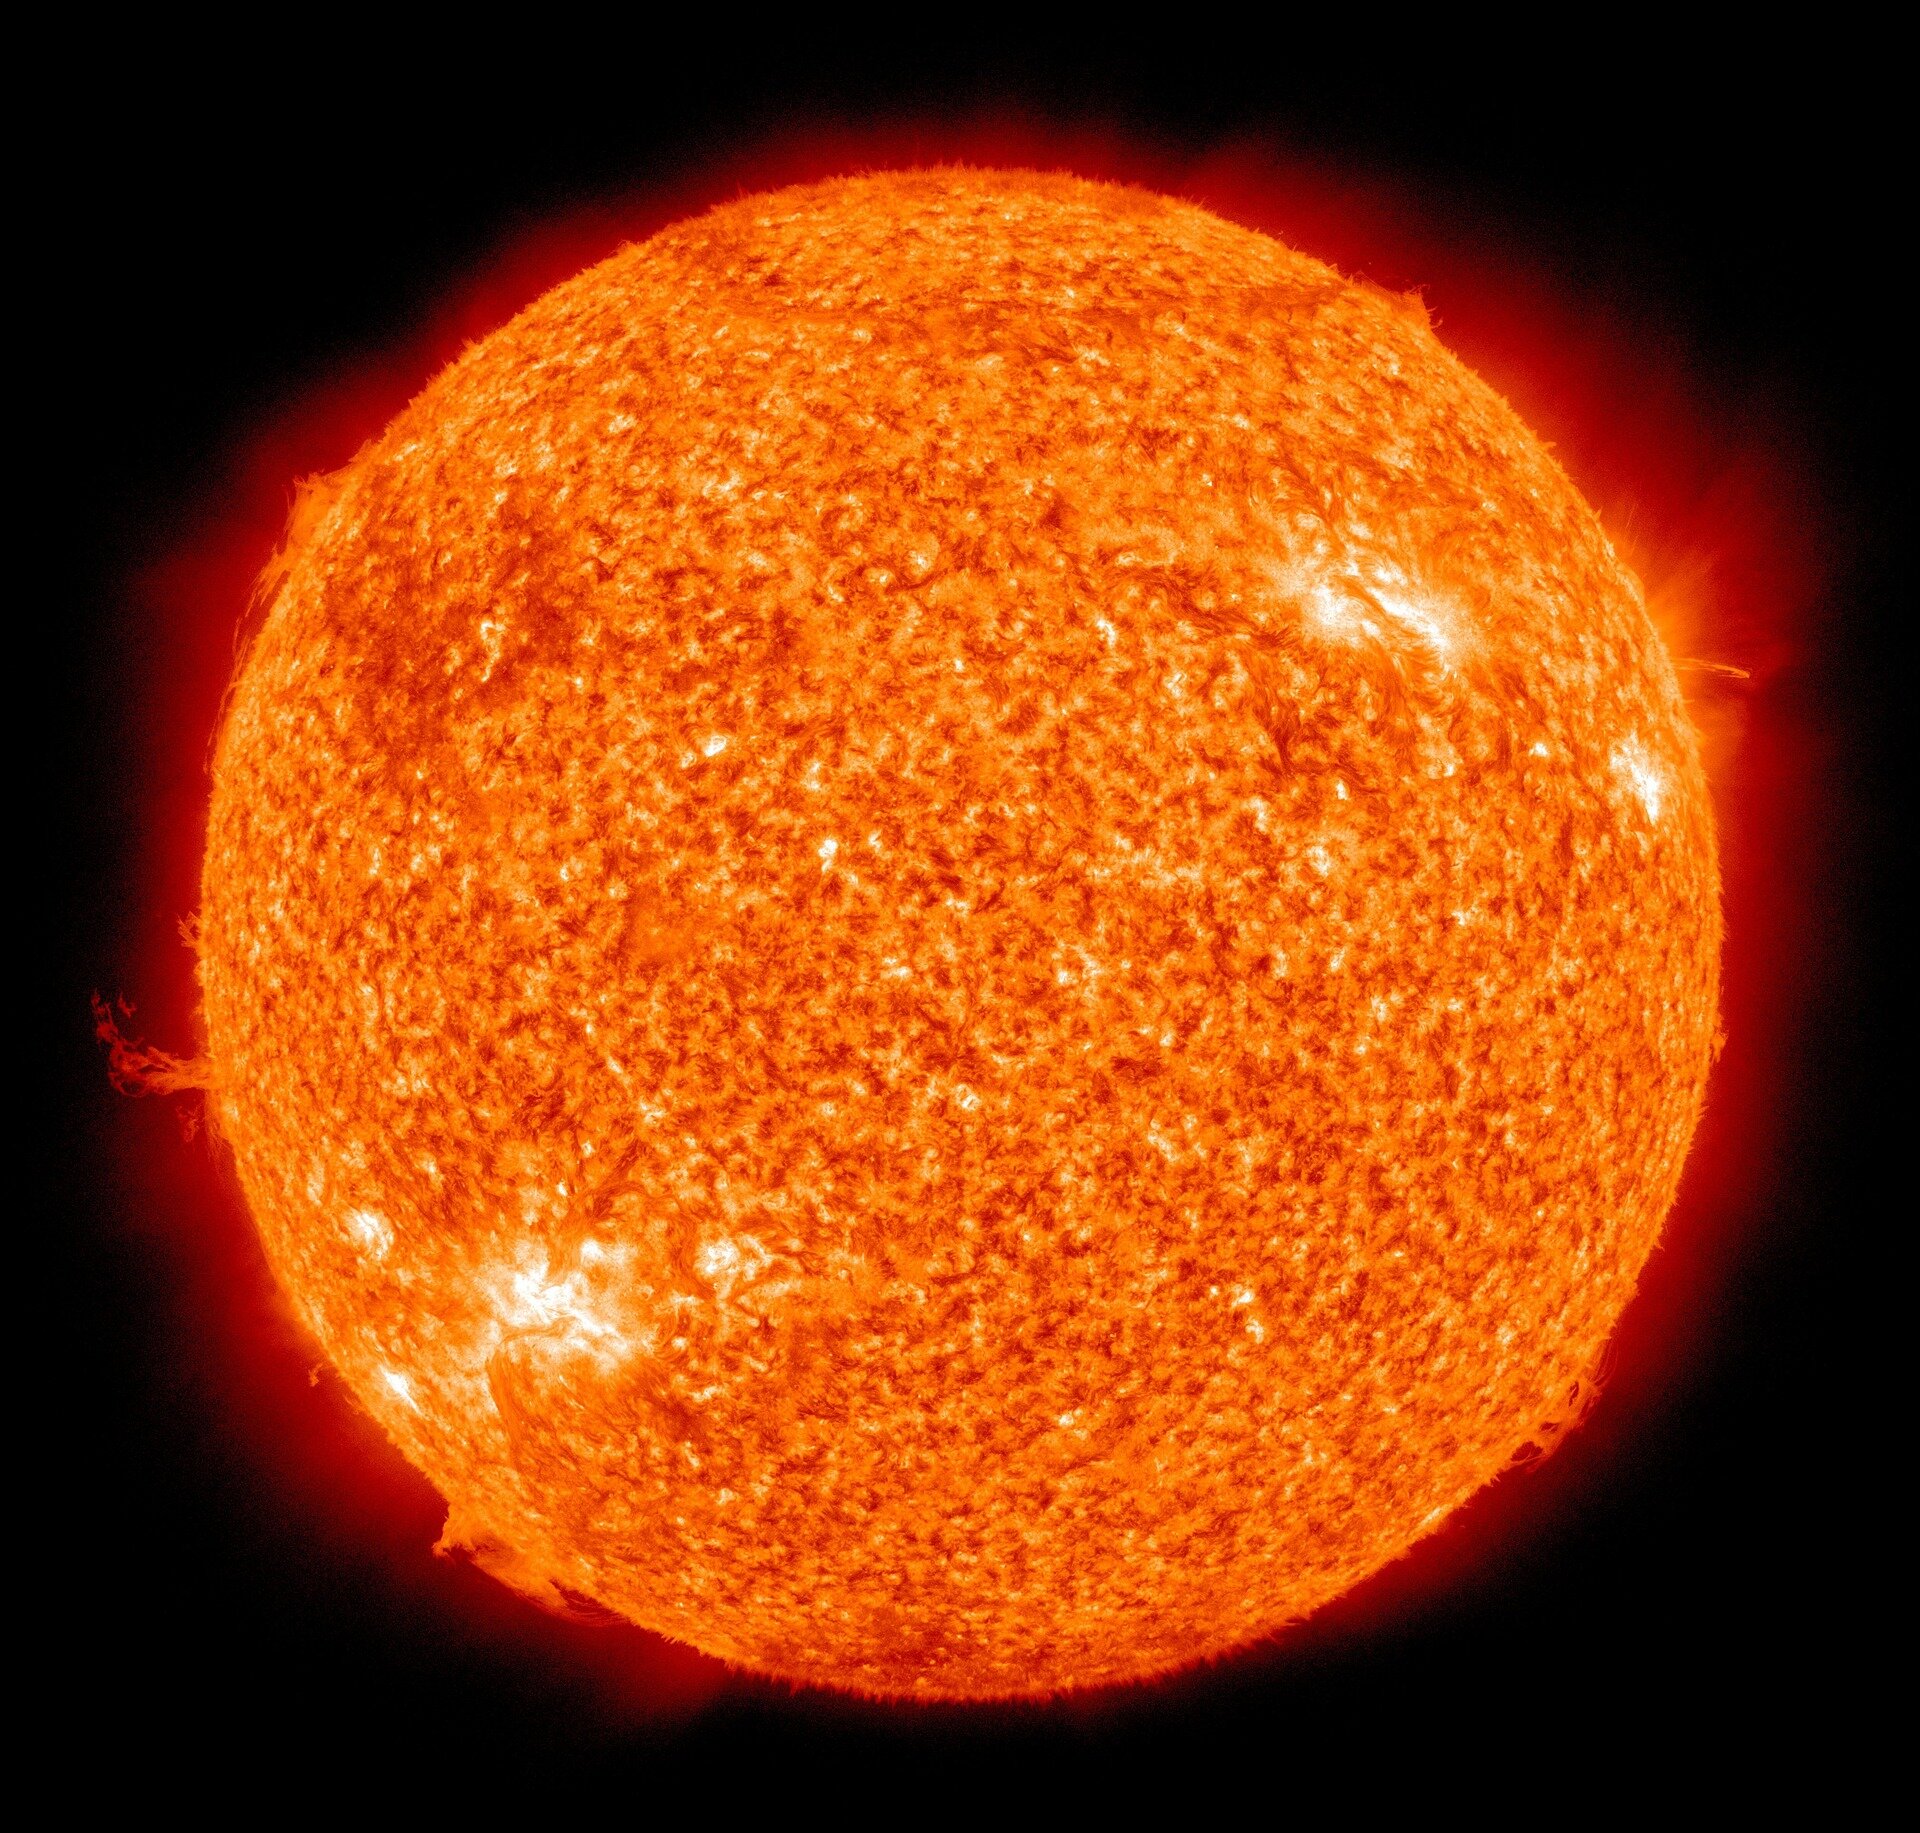 At the peak of solar activity. What’s the danger?